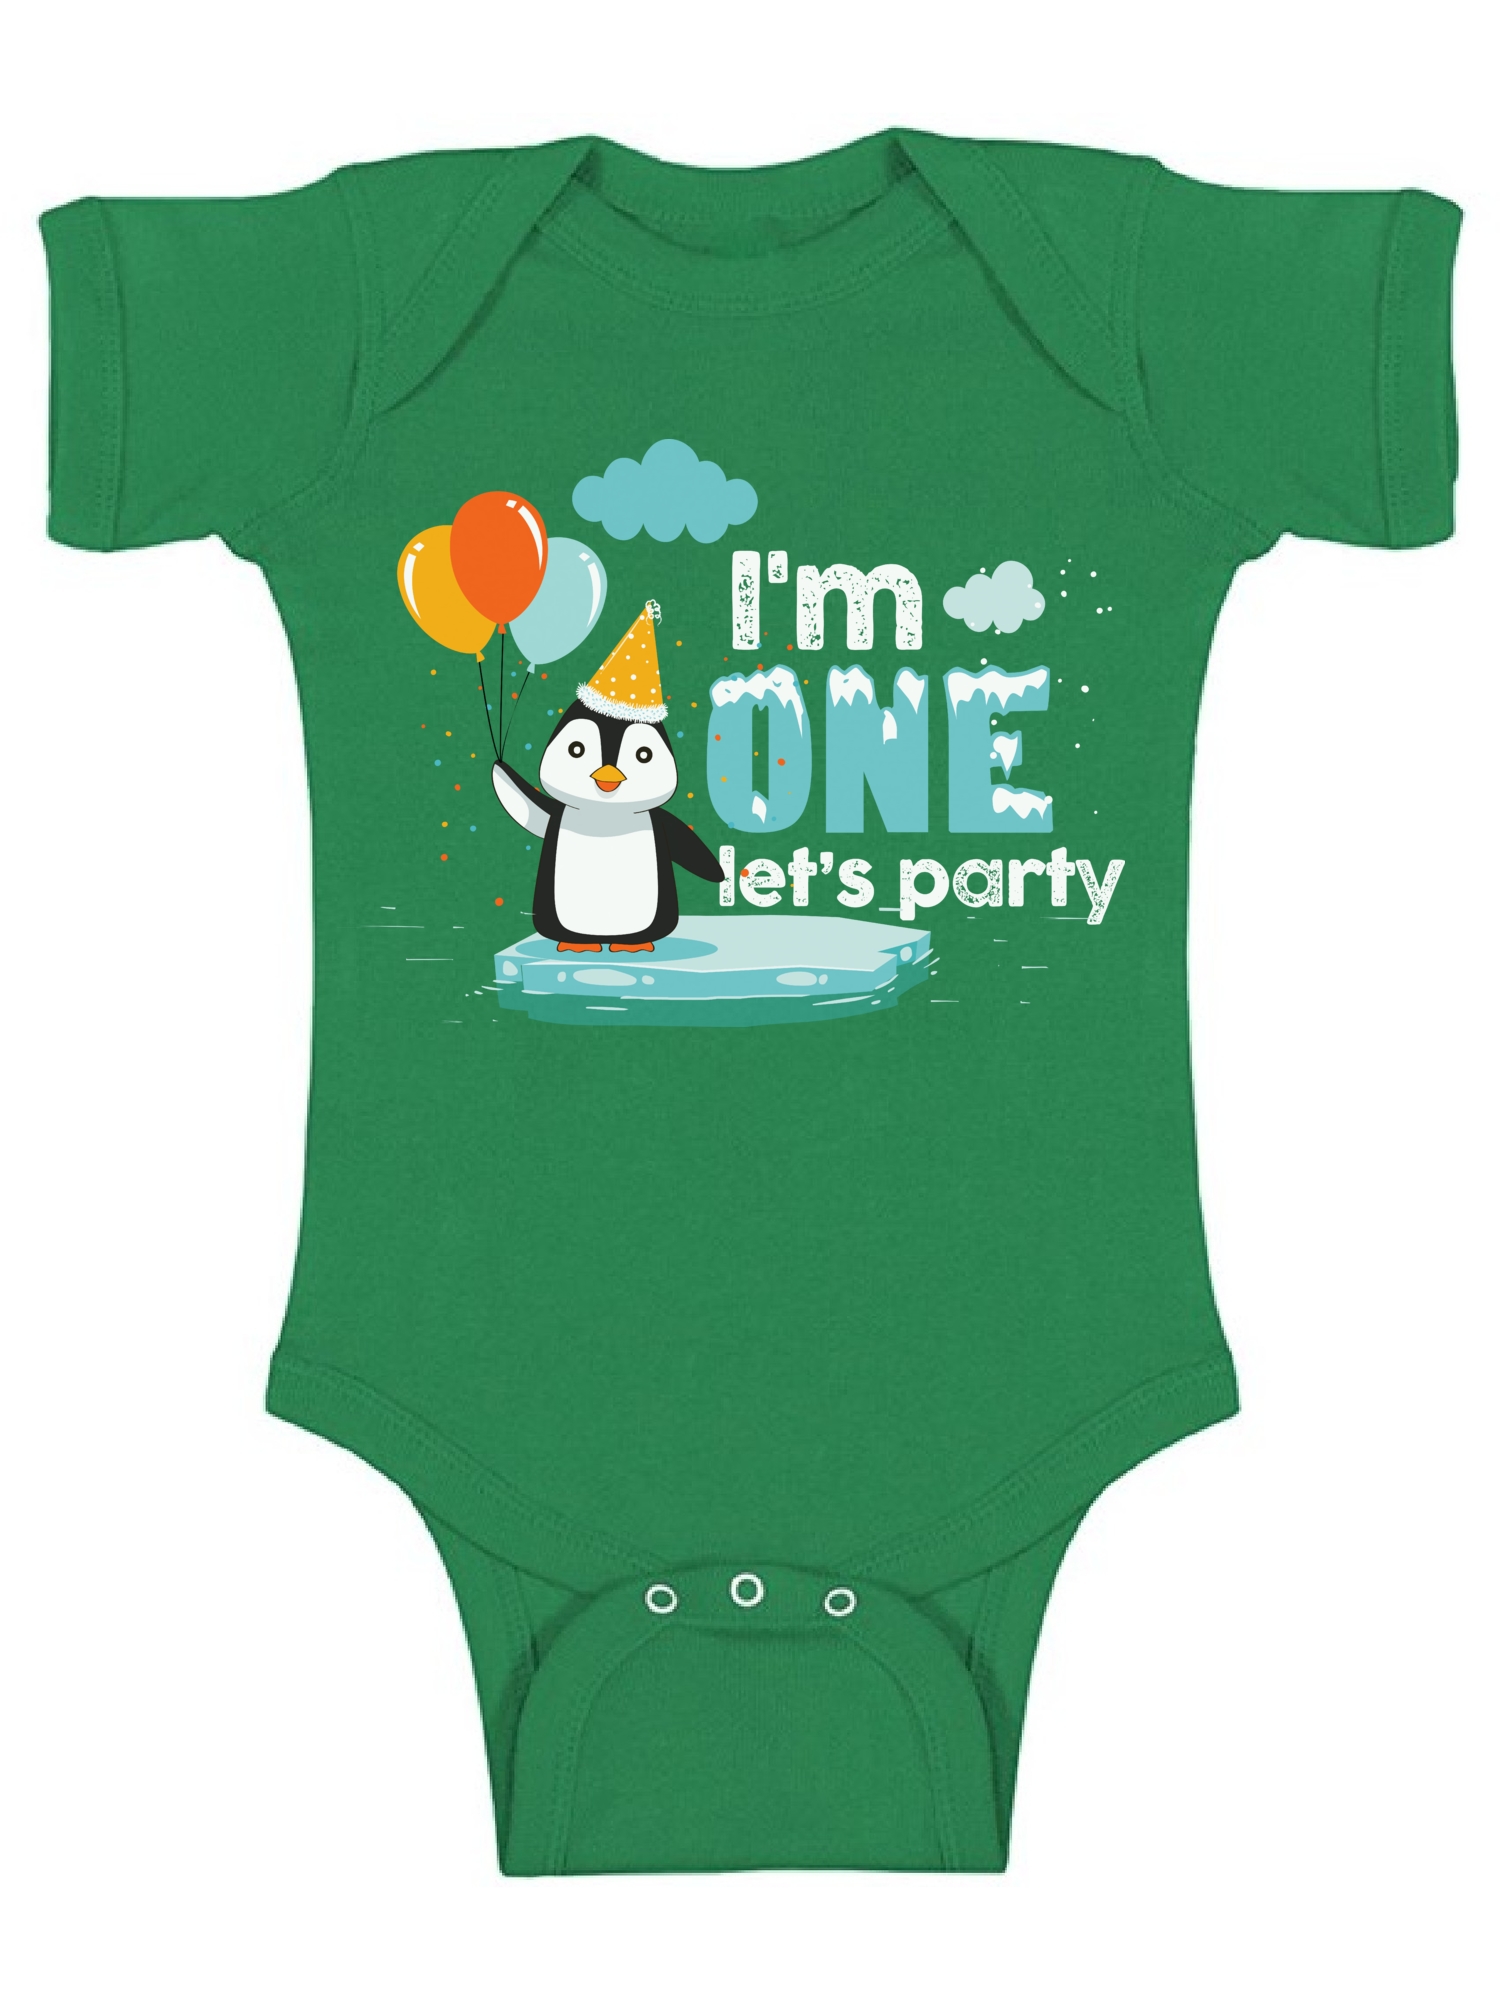 Awkward Styles First Birthday 1st Birthday Boy Bodysuit 1st B Day One Piece Baby Birthday Penguin Outfit for Baby Boy and Baby Girl Penguin Birthday Gifts Newborn Baby Girl Clothes - image 1 of 4